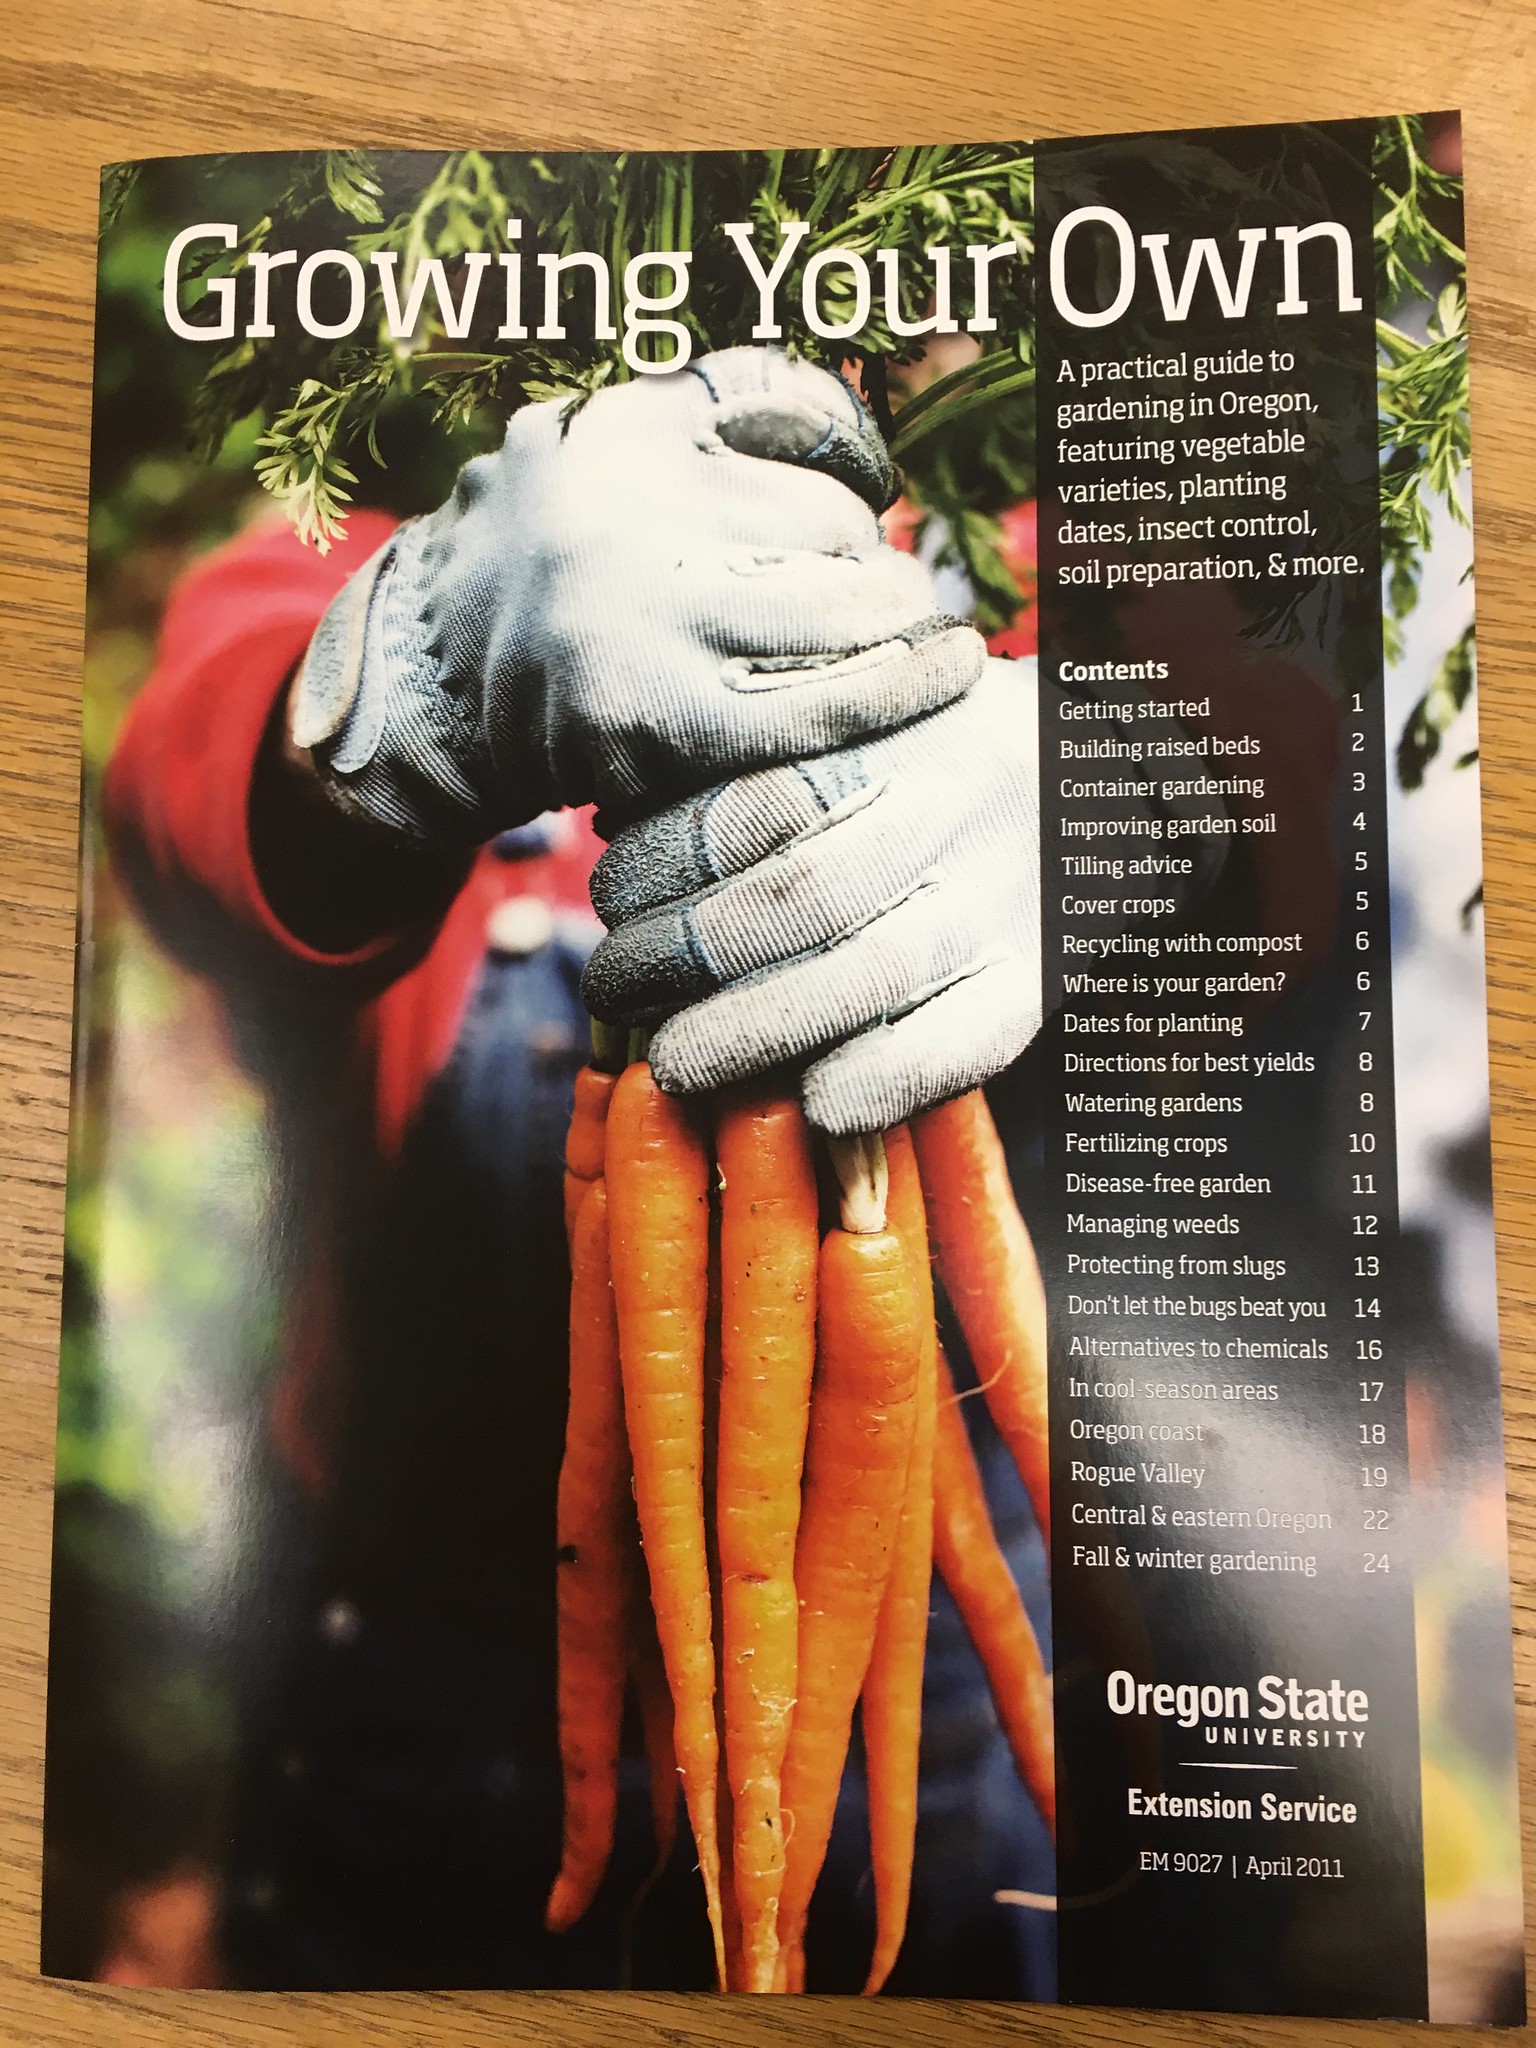 Dig into hundreds of publications from OSU Extension online catalog